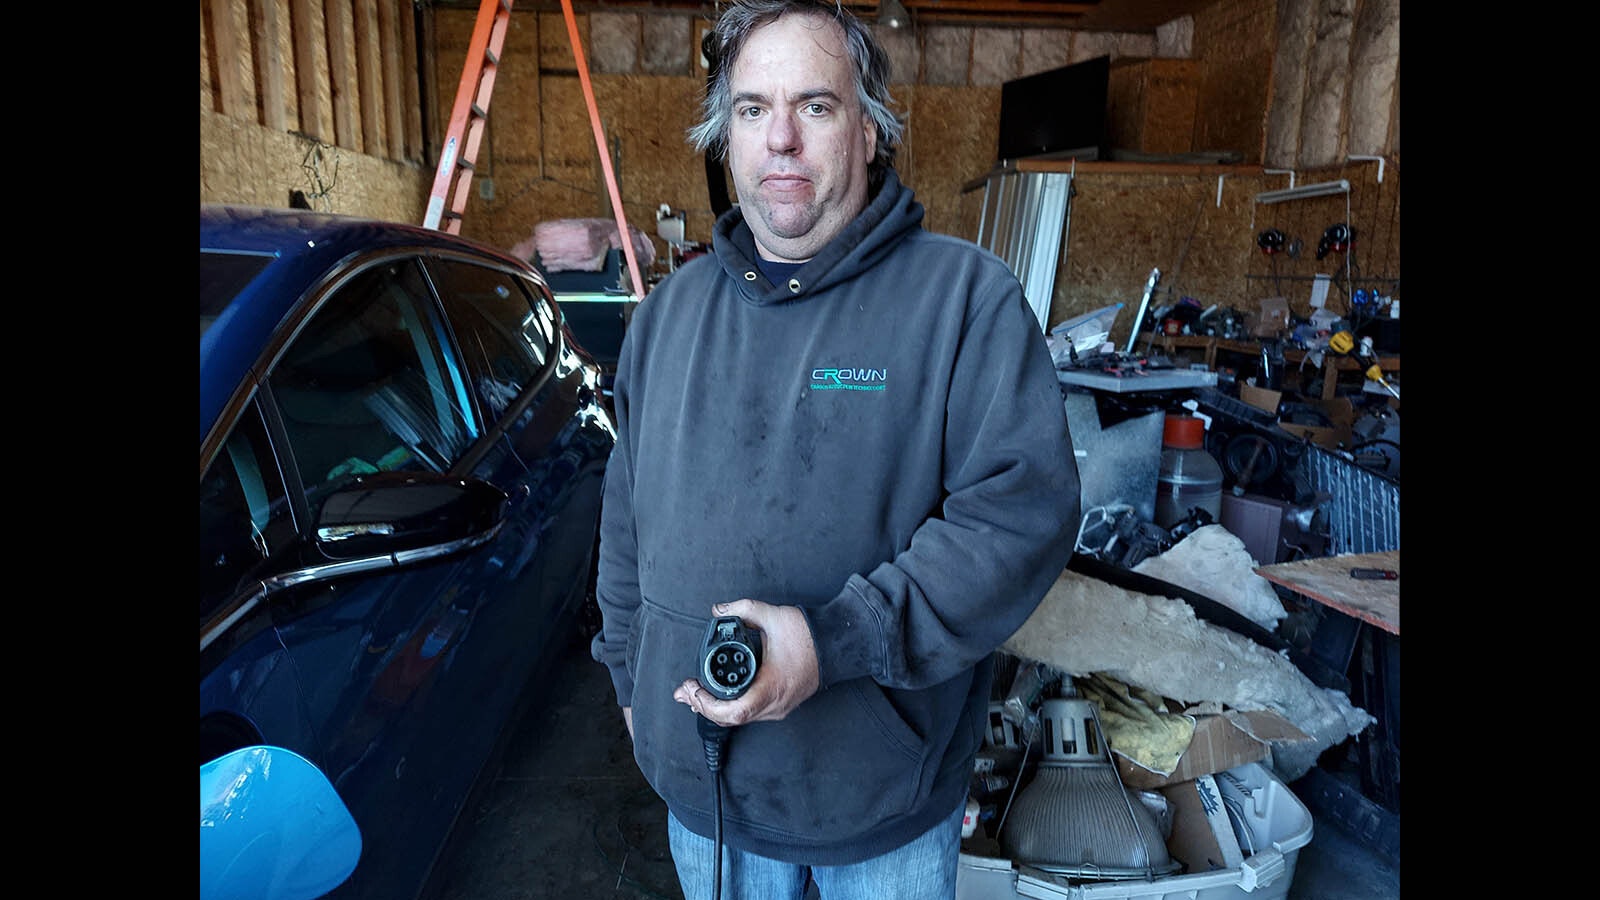 Robert Avery lives in Gillette, works for the coal industry and also drives an EV for Uber. He said the irony of driving an EV around the coal capital of the nation isn't lost on him, but that it's a great conversation starter and people are usually surprised when they ride in his EV.